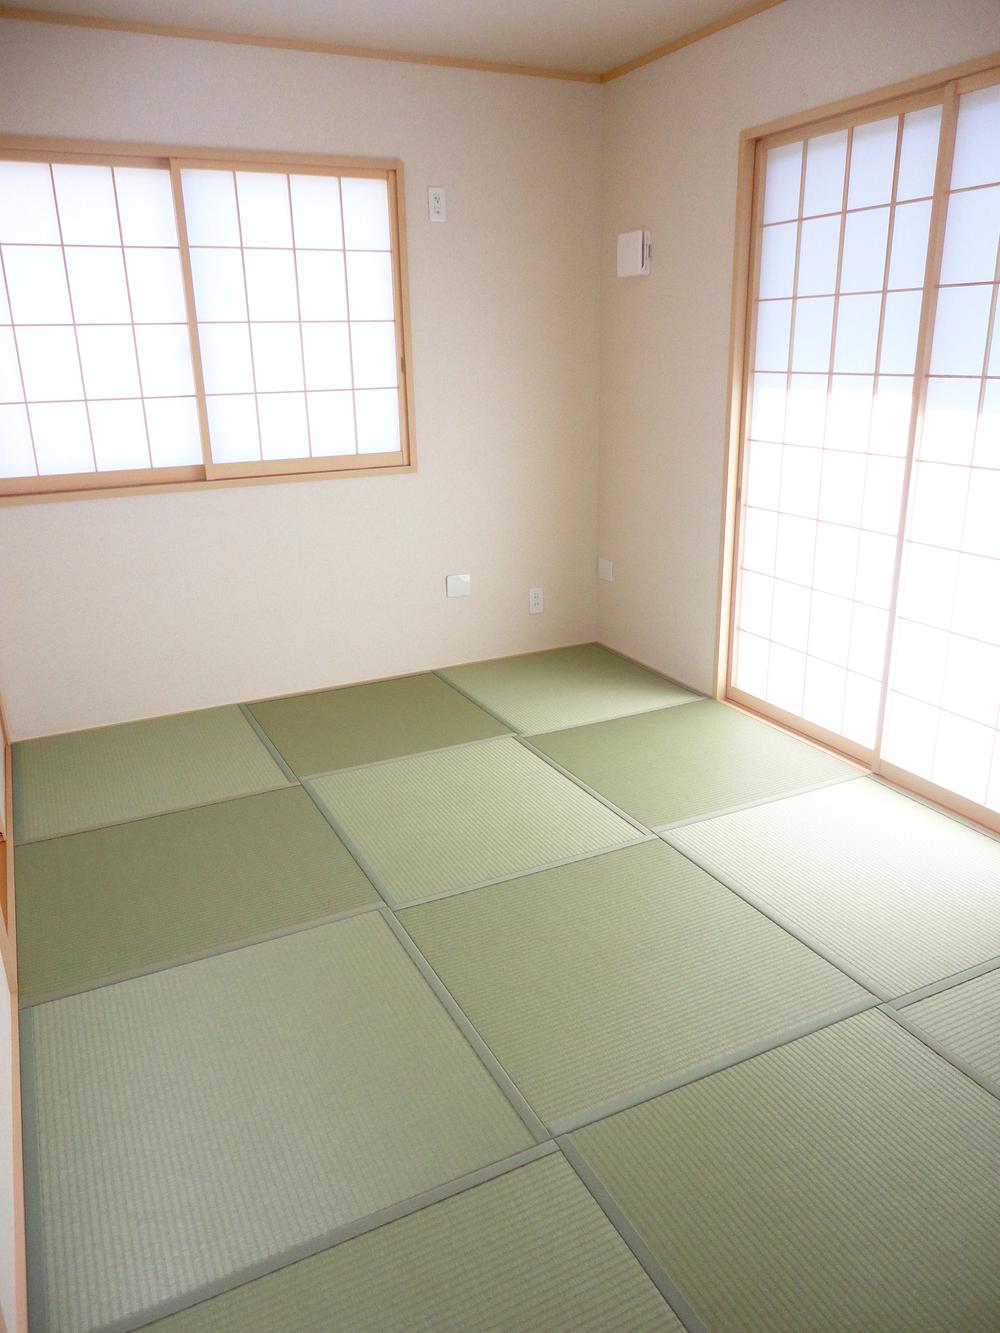 Non-living room. Japanese-style room - the same specification